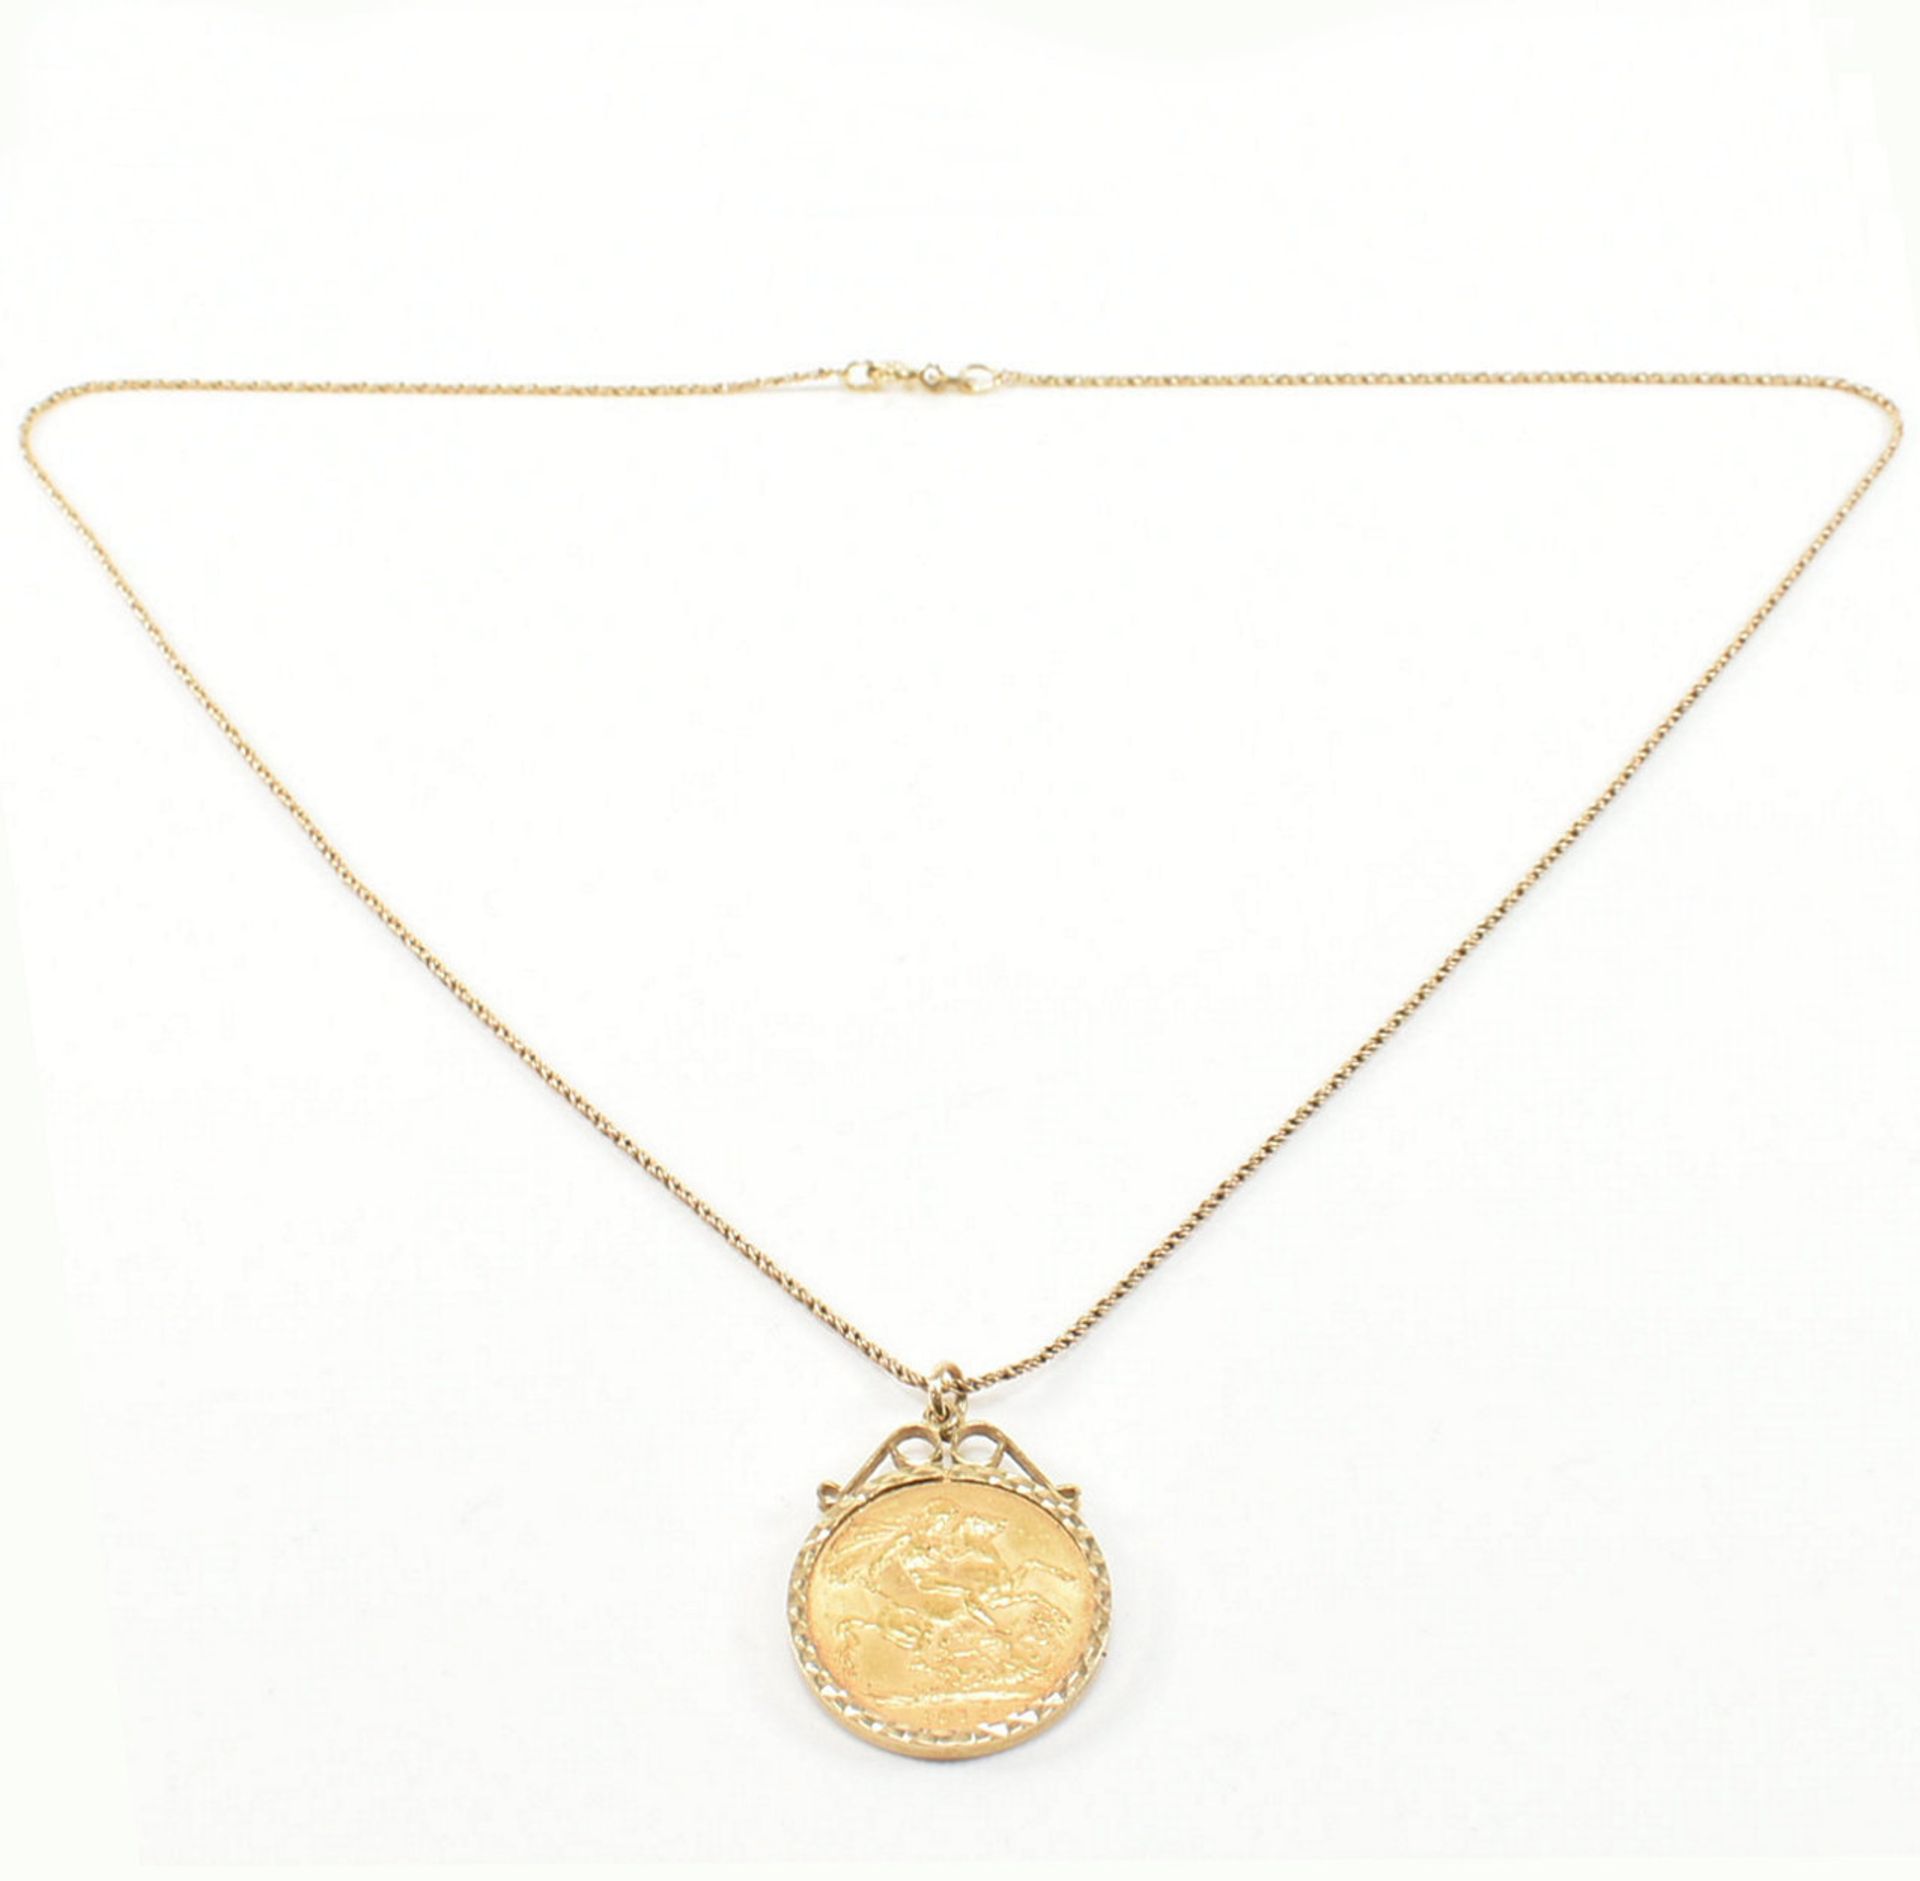 MOUNTED 1912 FULL SOVEREIGN COIN HALLMARKED 9CT GOLD MOUNT & CHAIN - Image 5 of 5